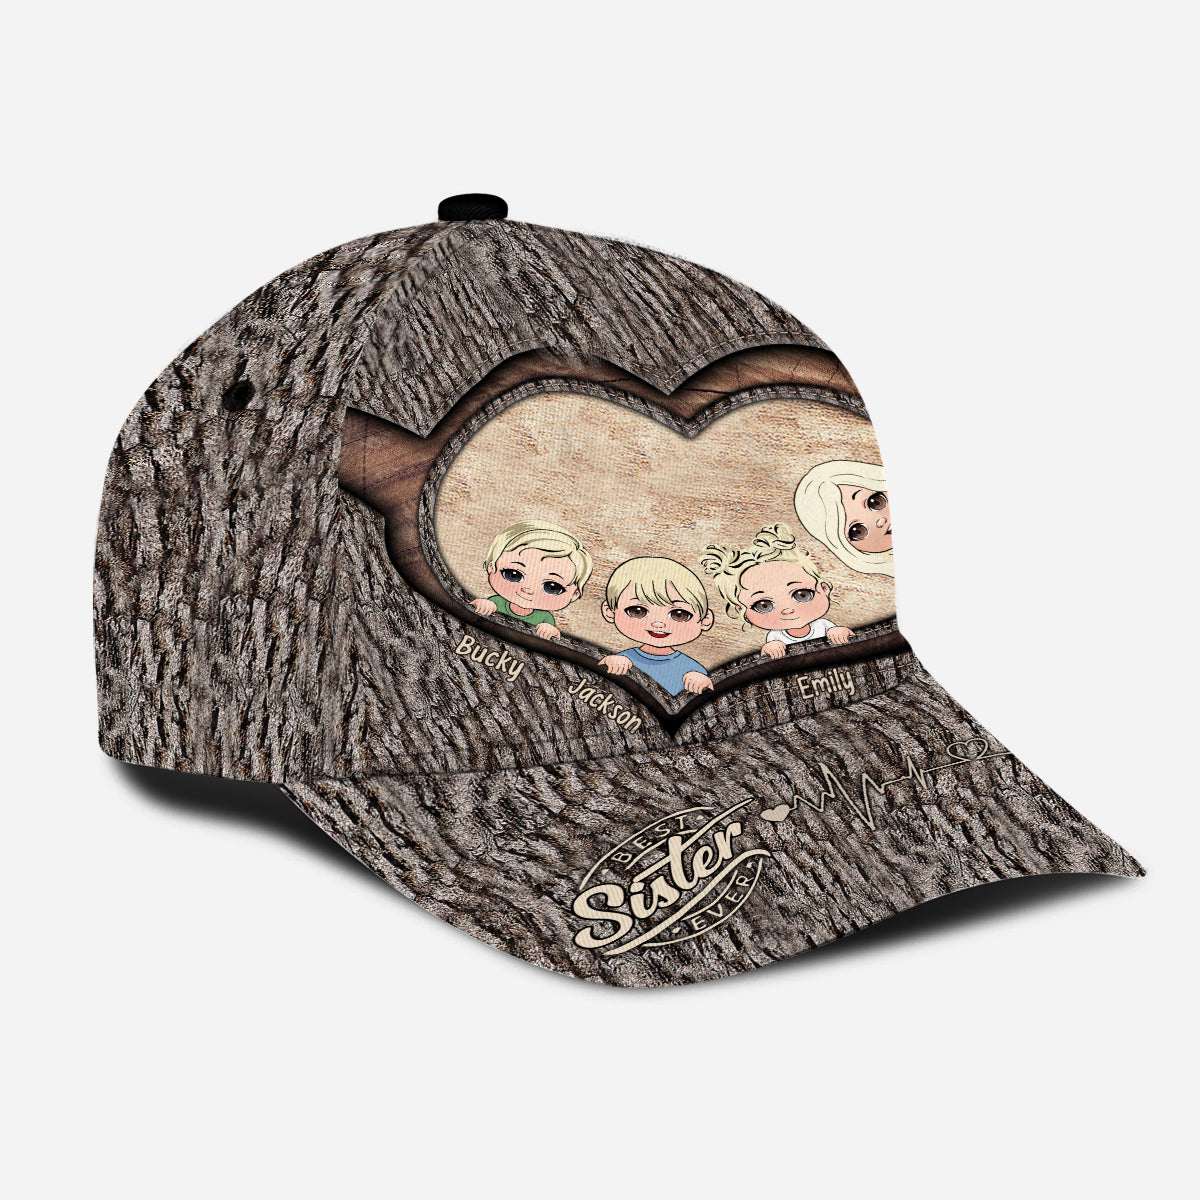 Disover Whenever You Touch This Heart - Gift for dad, grandma Personalized Classic Cap